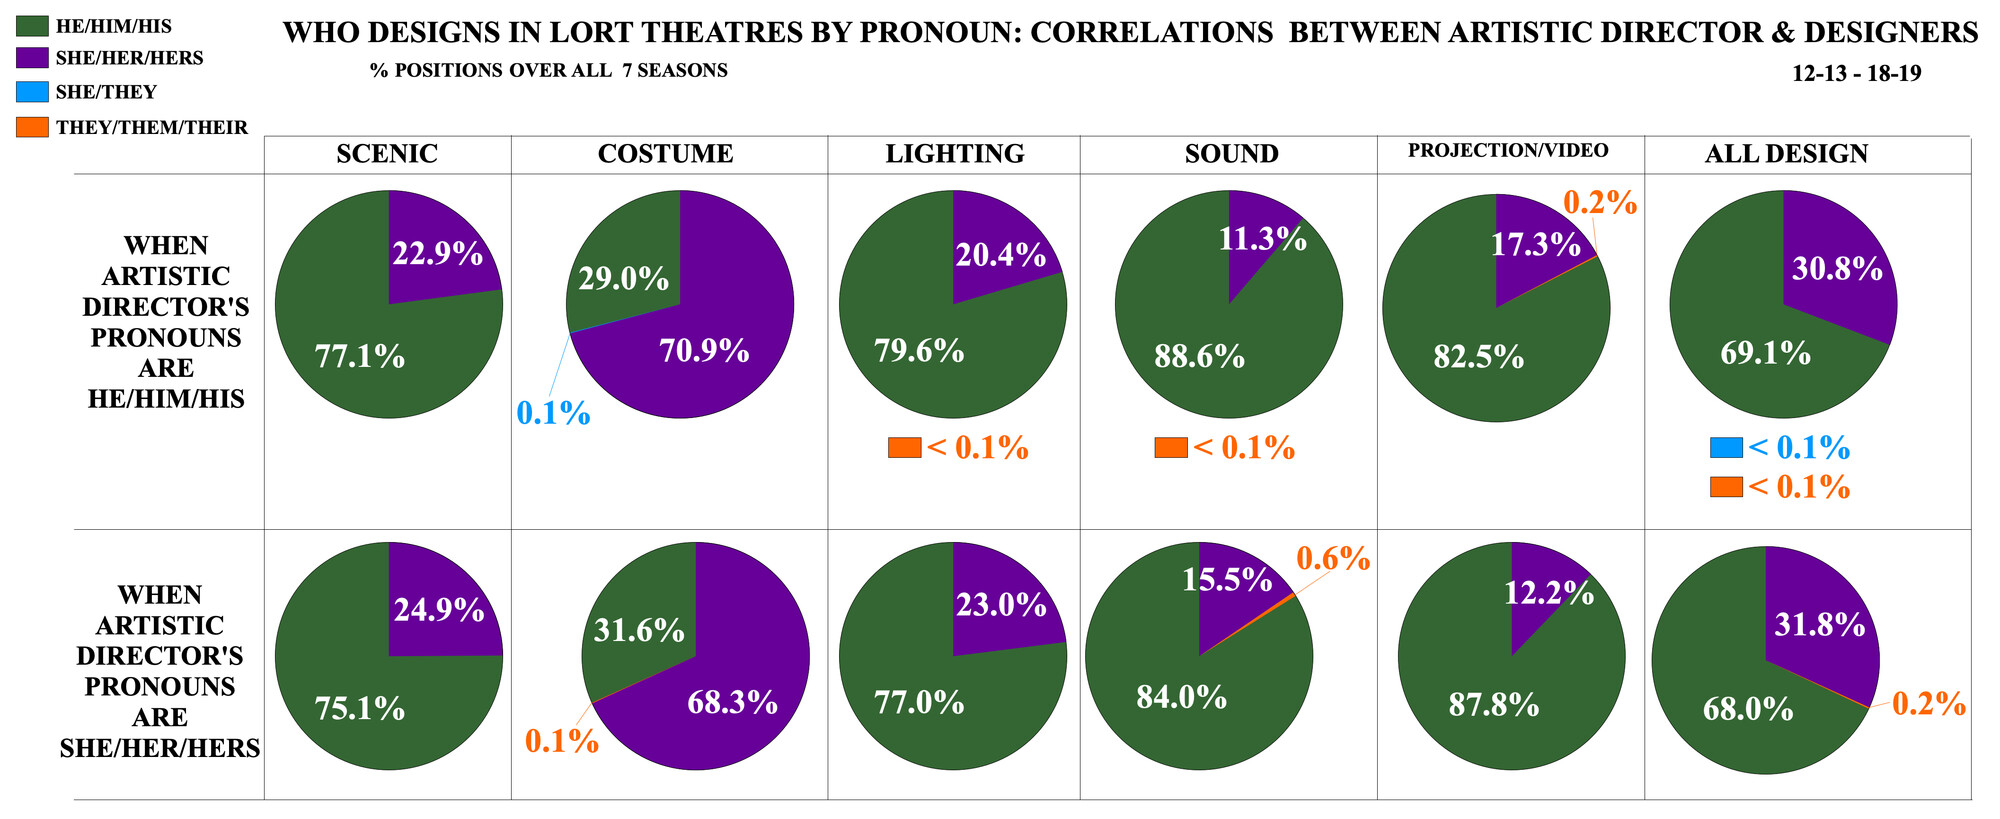 Who Designs in LORT Theatres by Pronoun: Correlations between Artistic Director & Designers